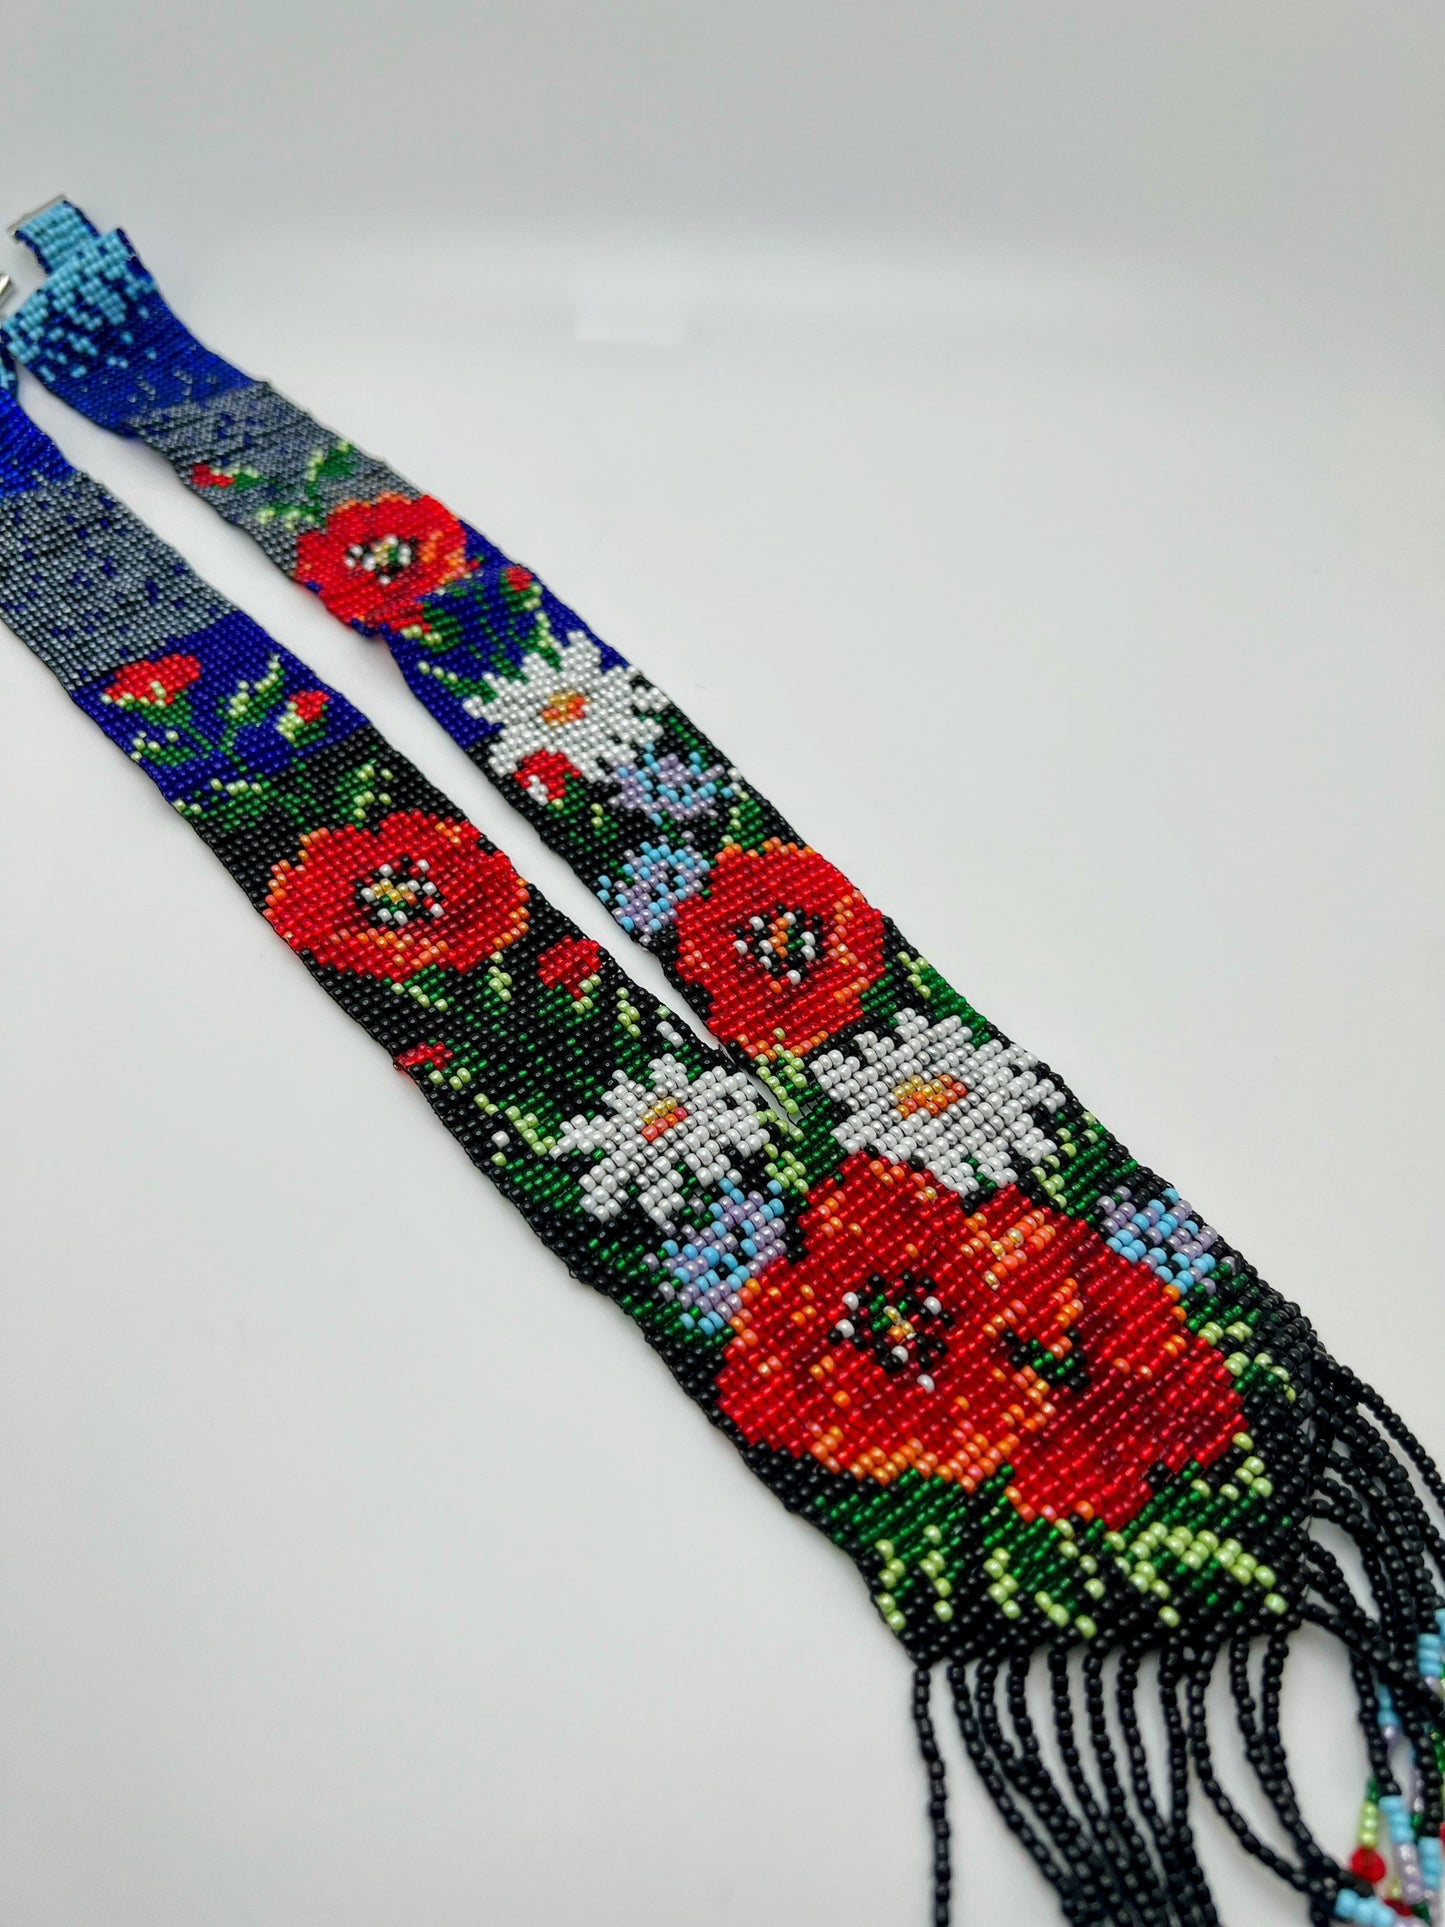 Red Flowers Loom-beaded Necklace with Black/White Background